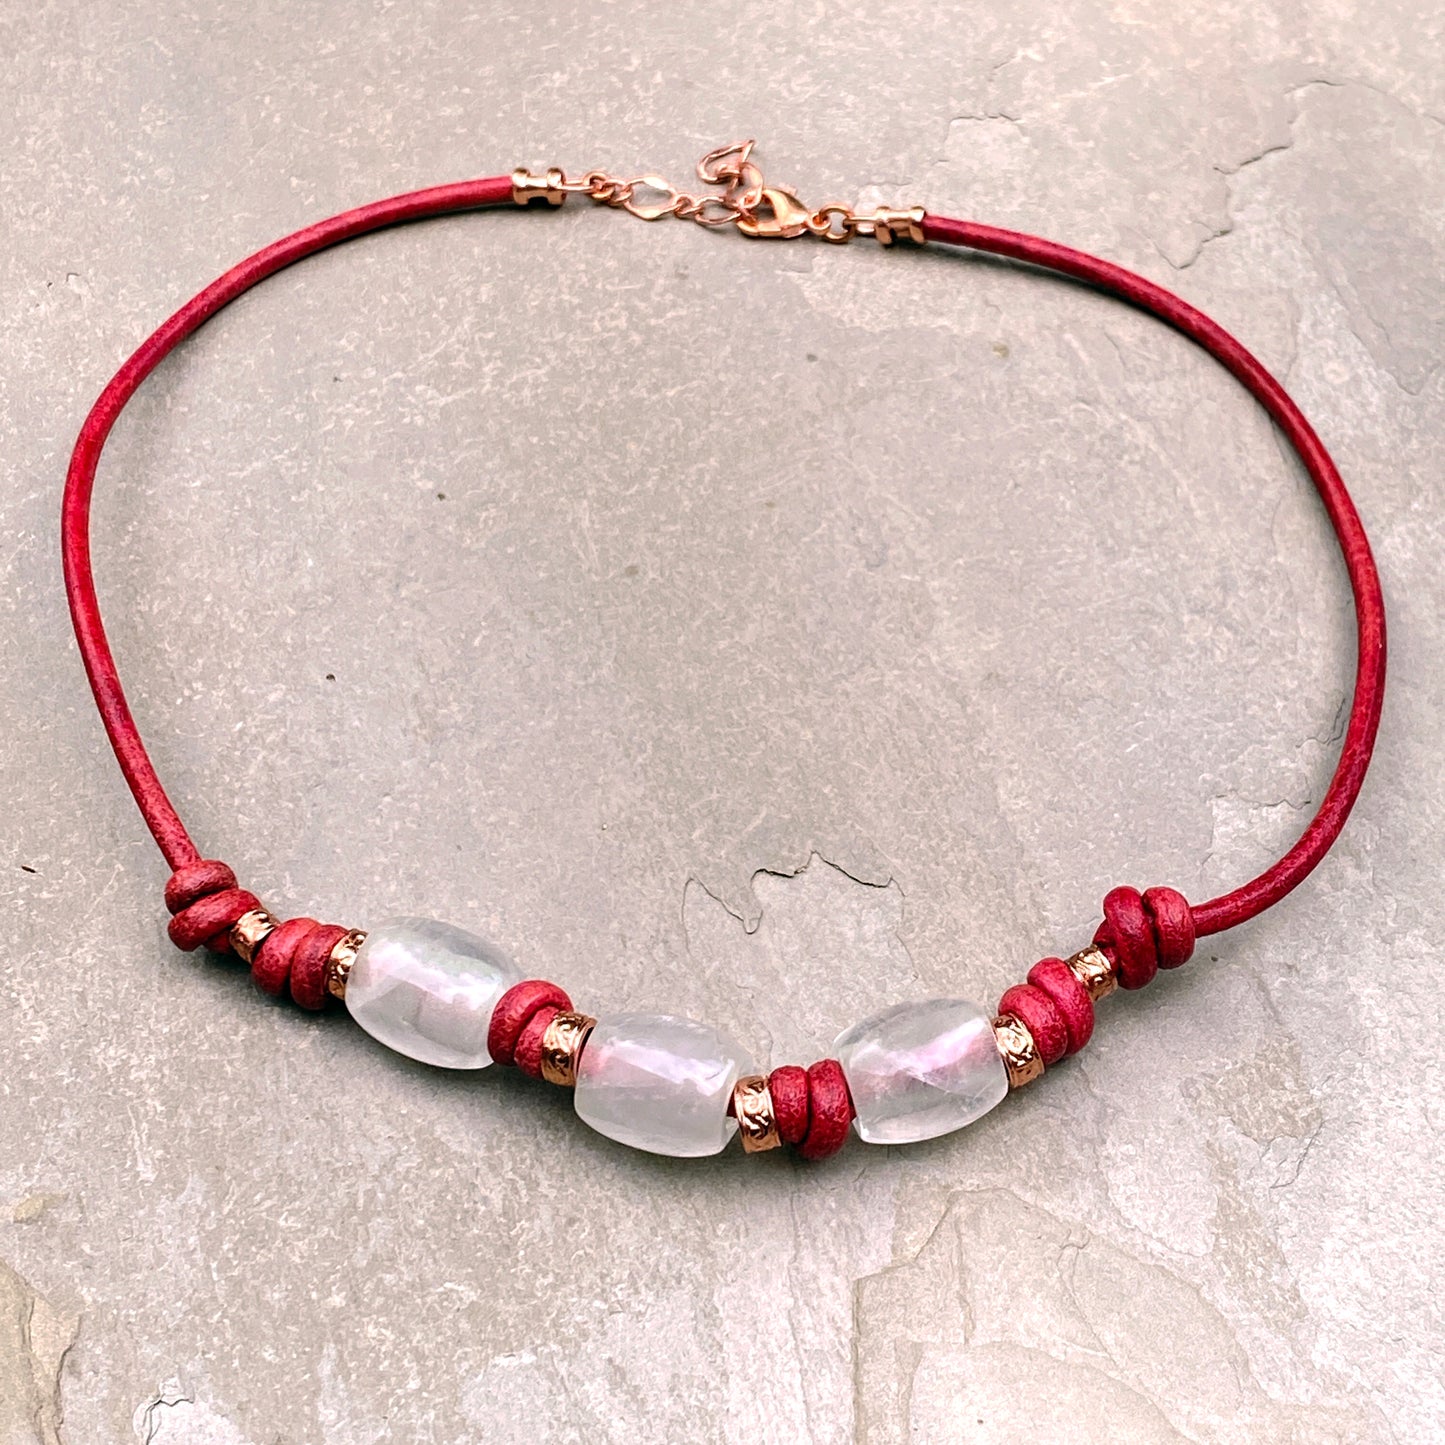 Quartz Gemstone and Copper on Red Leather Necklace